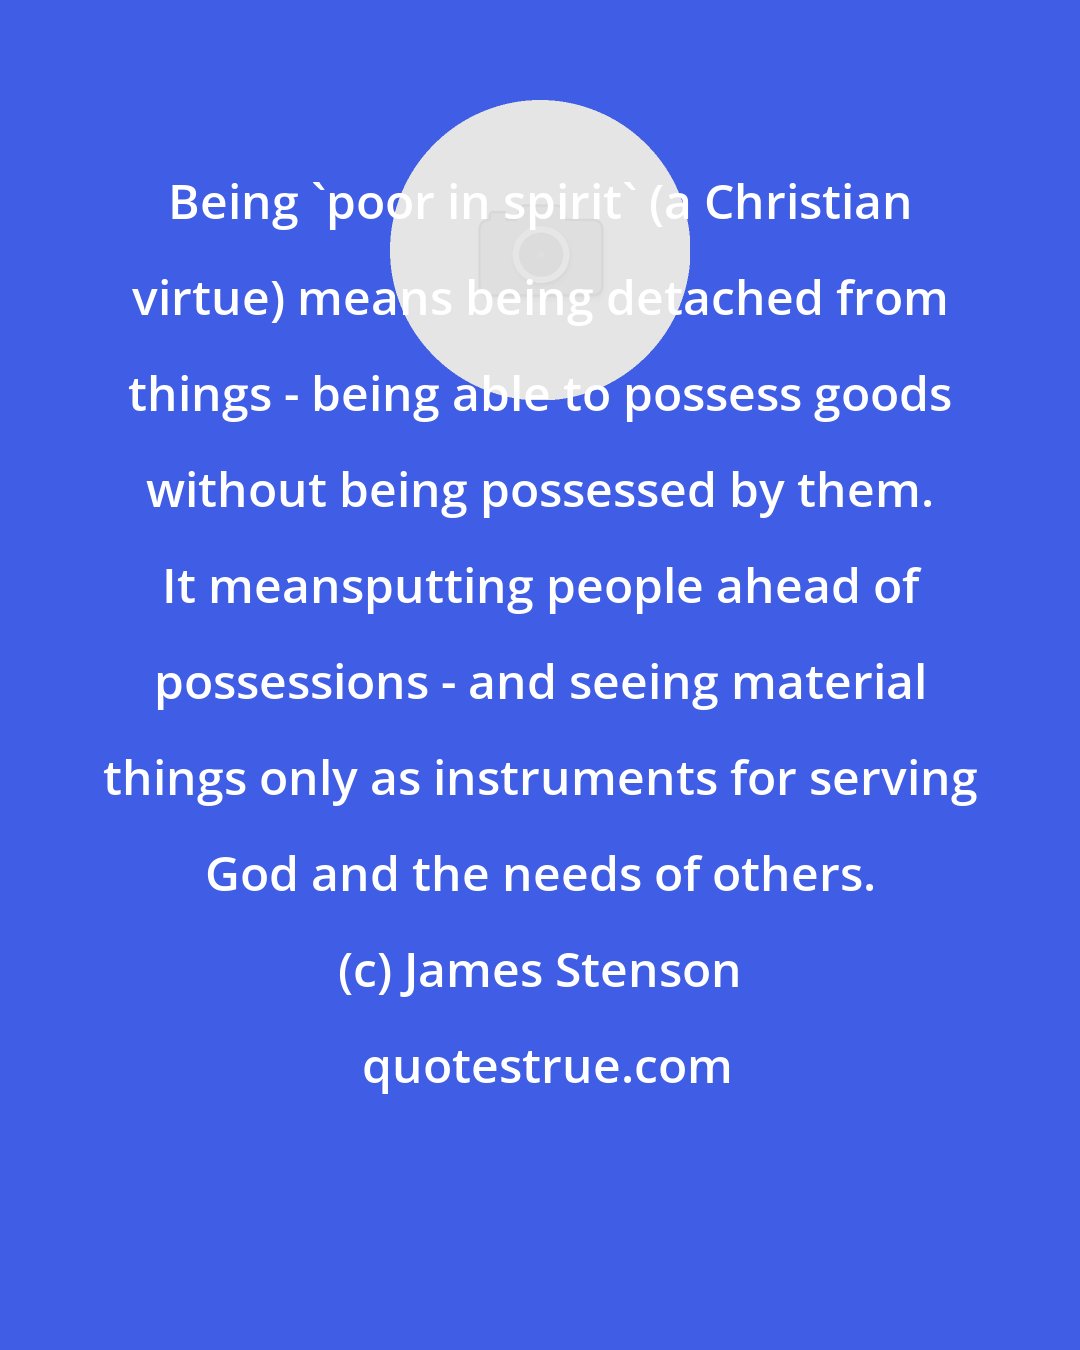 James Stenson: Being 'poor in spirit' (a Christian virtue) means being detached from things - being able to possess goods without being possessed by them. It meansputting people ahead of possessions - and seeing material things only as instruments for serving God and the needs of others.